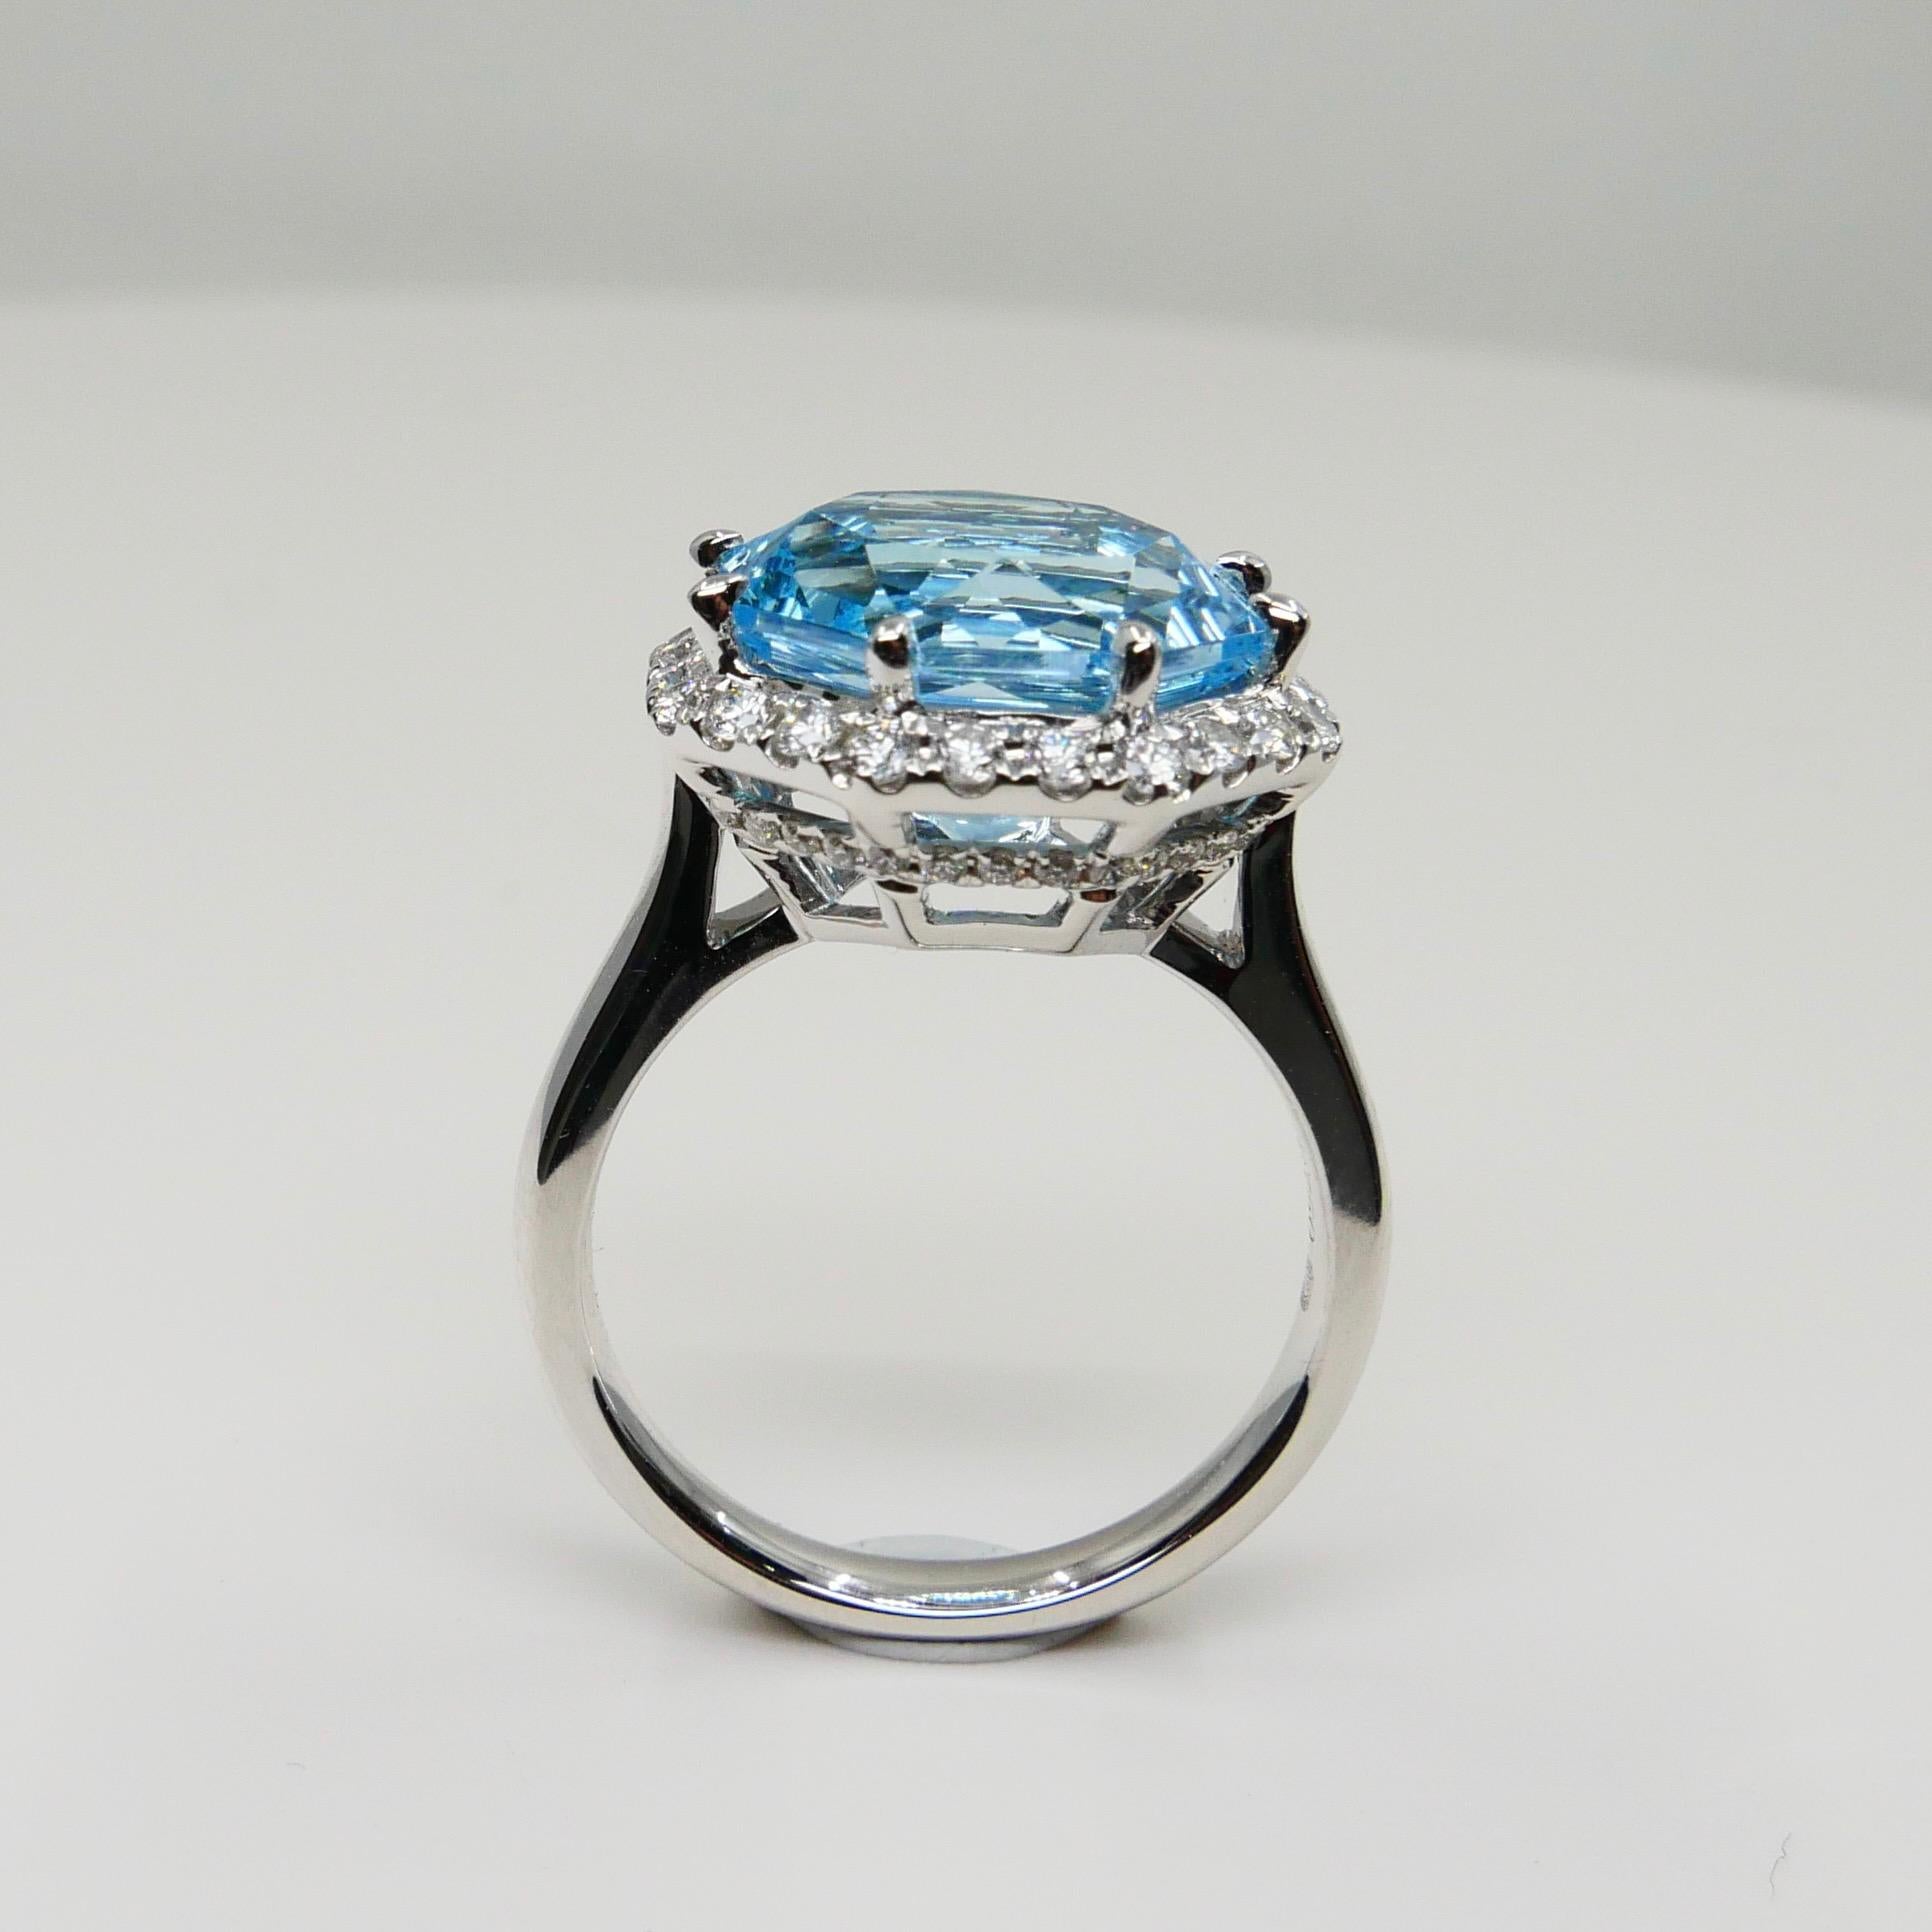 Octagon Cut Flower Cut Powder Blue Topaz 7.86 Cts and Diamond Cocktail Ring, Statement Ring For Sale